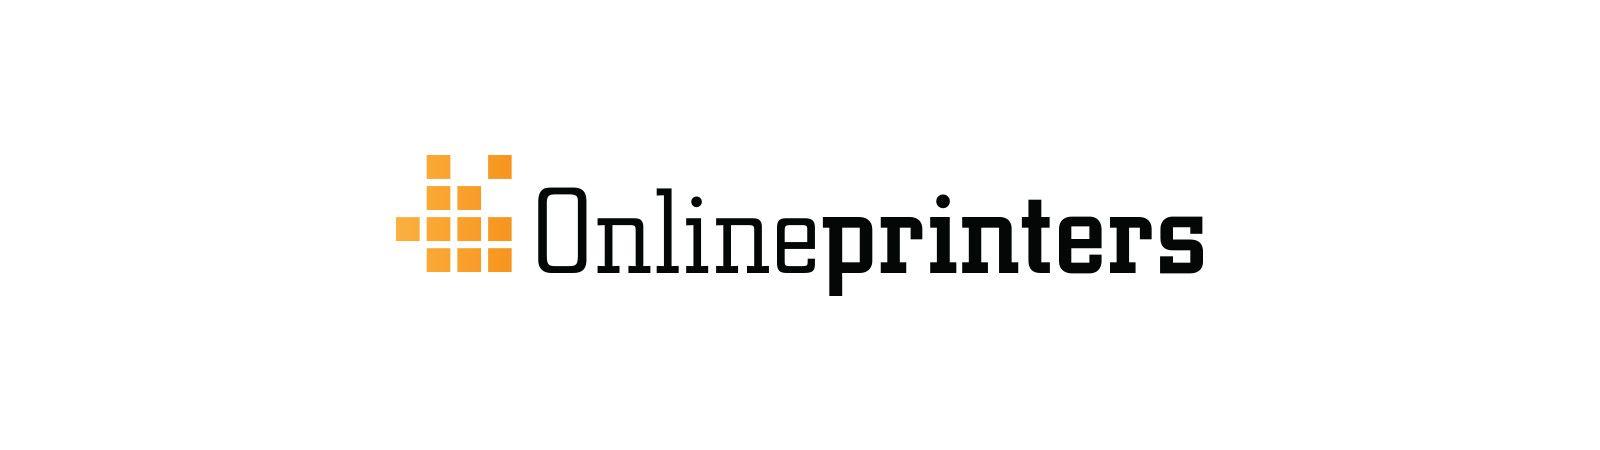 Online Printing Logo - Onlineprinters | Business Services Sector | TA | A Private Equity Firm